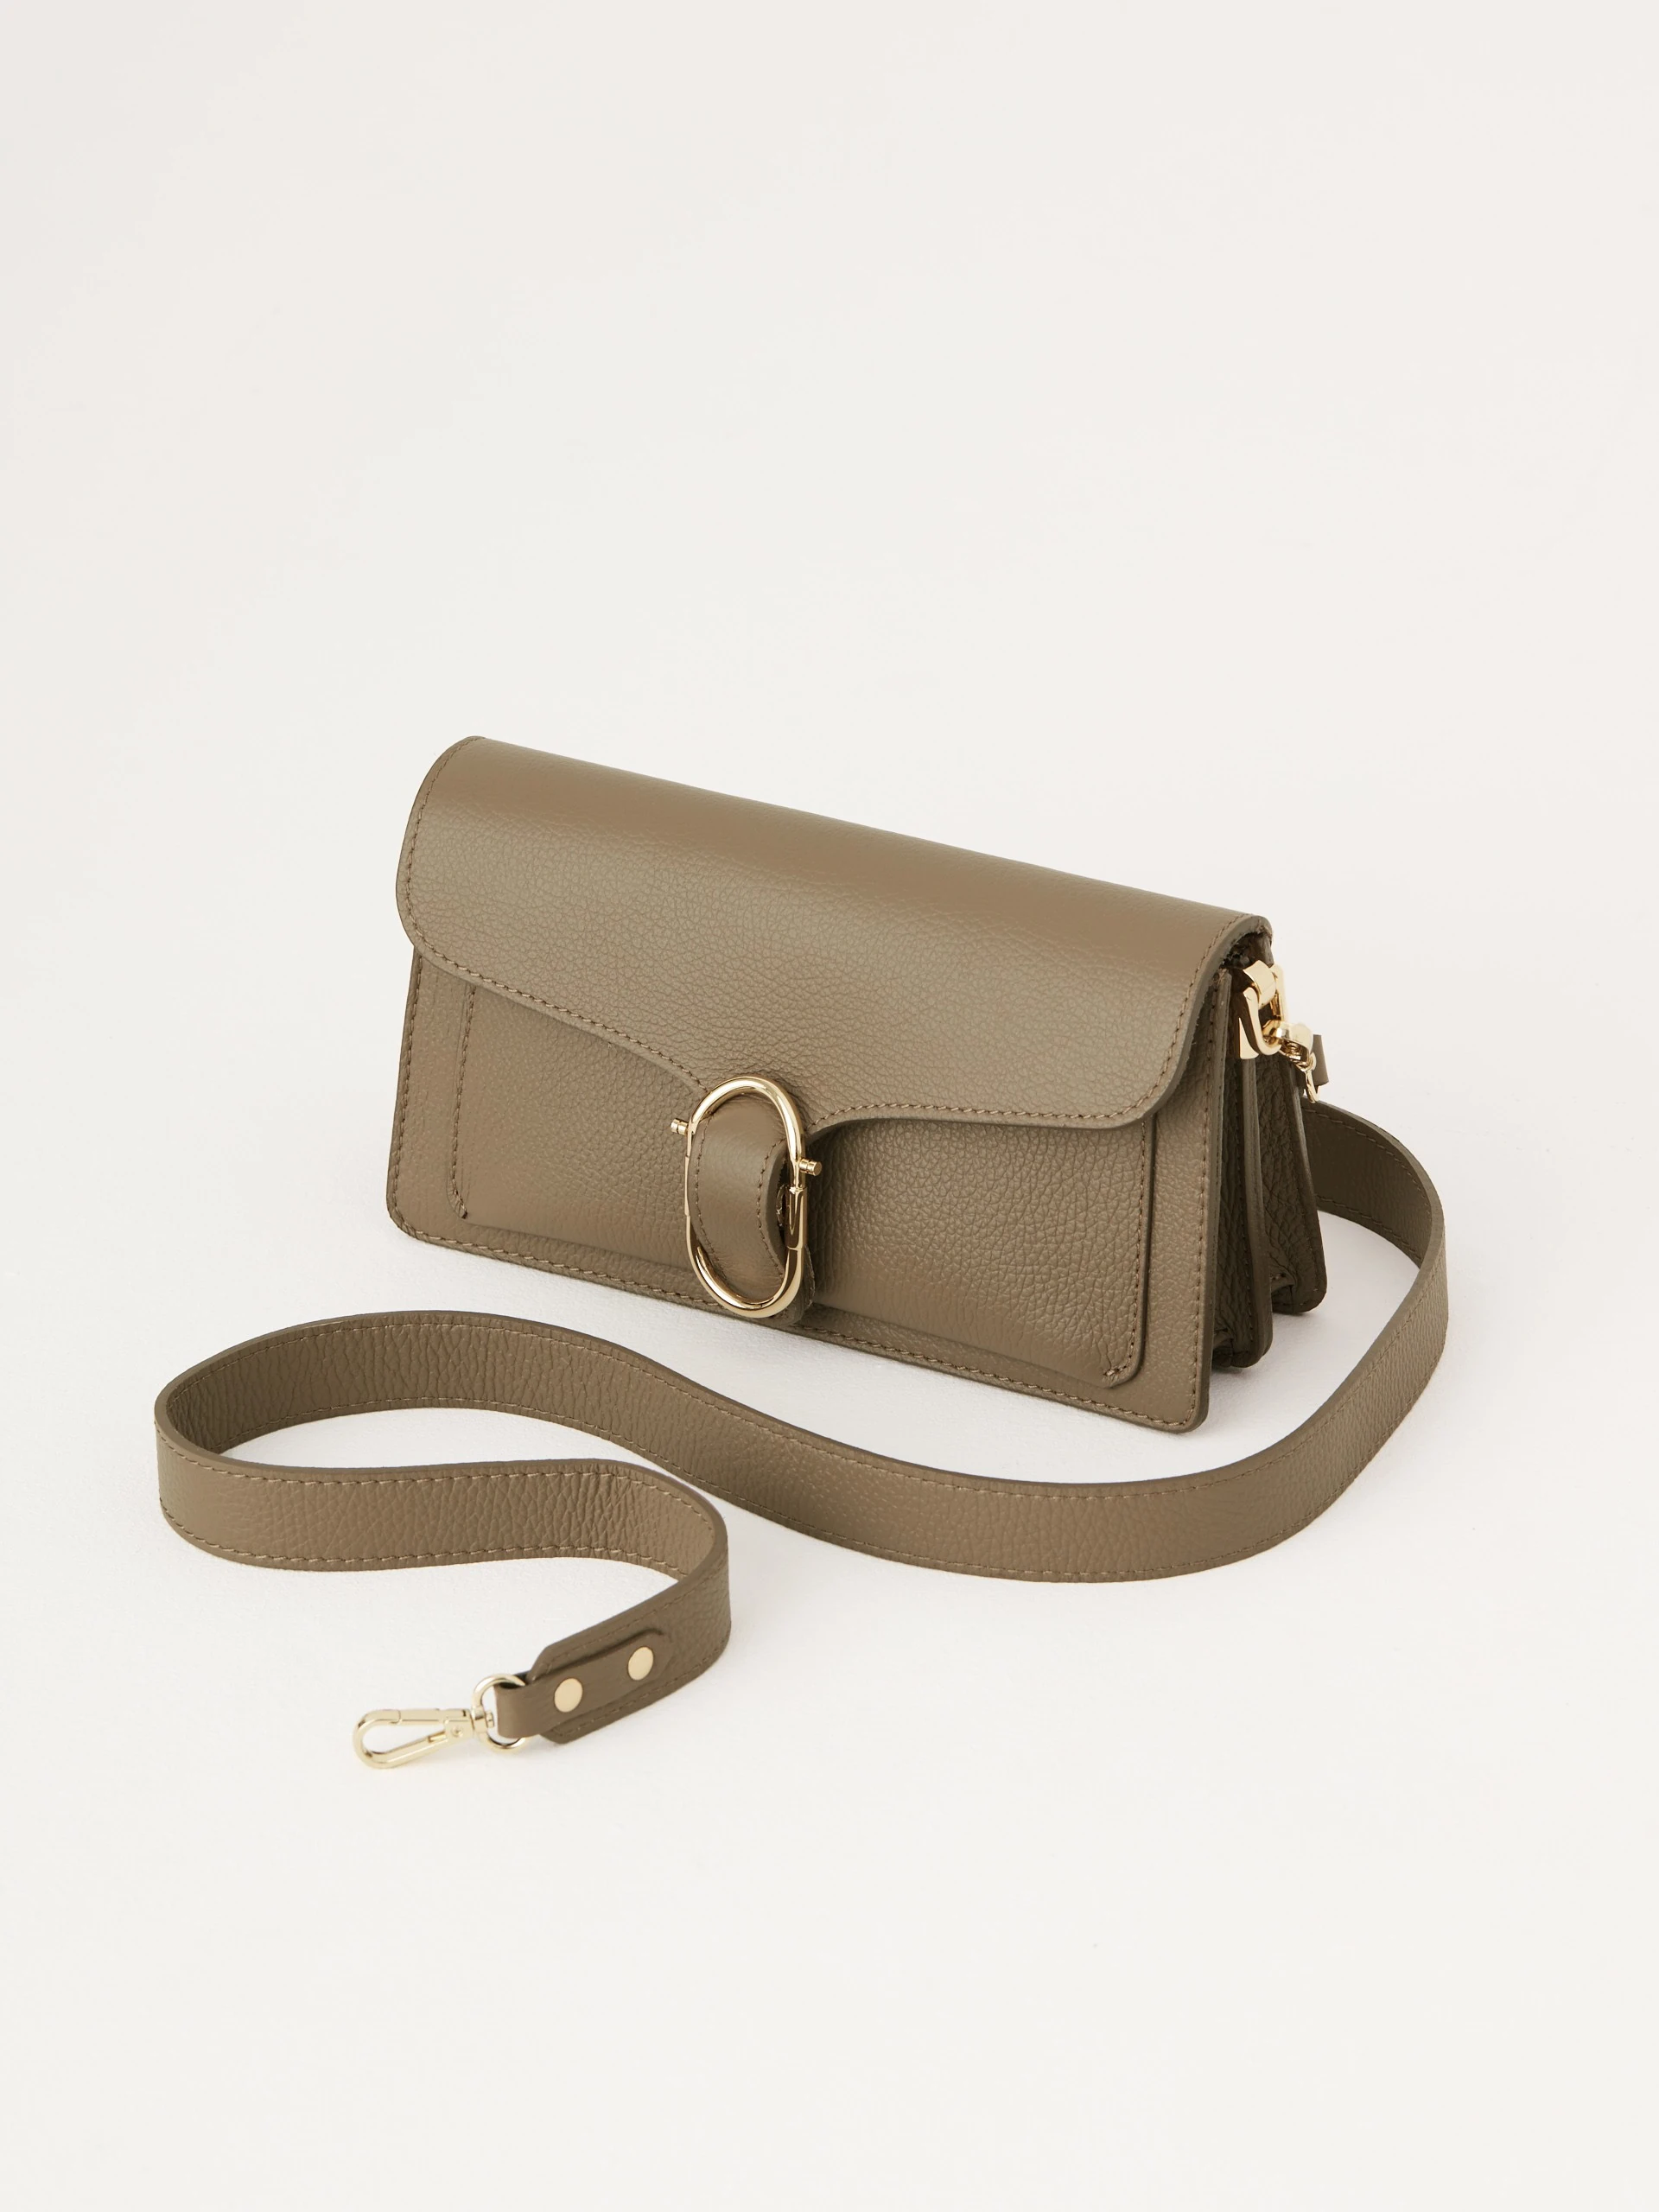 Leather handbag in taupe color